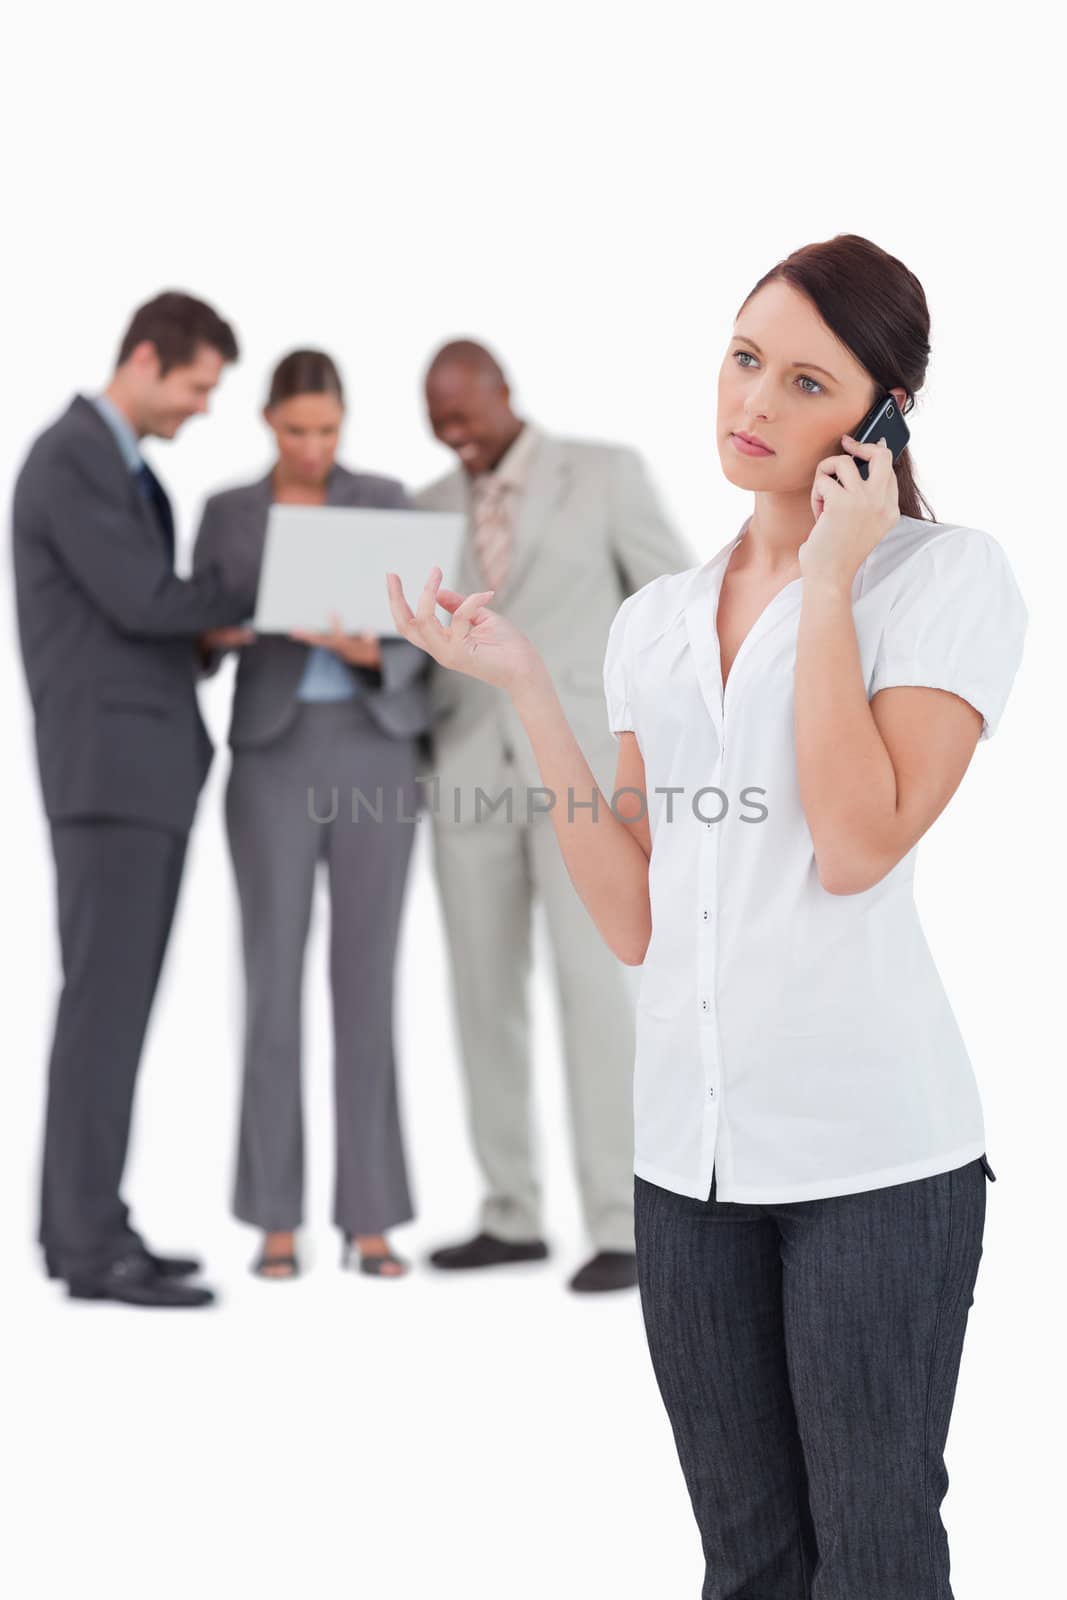 Businesswoman on the phone with colleagues behind her against a white background